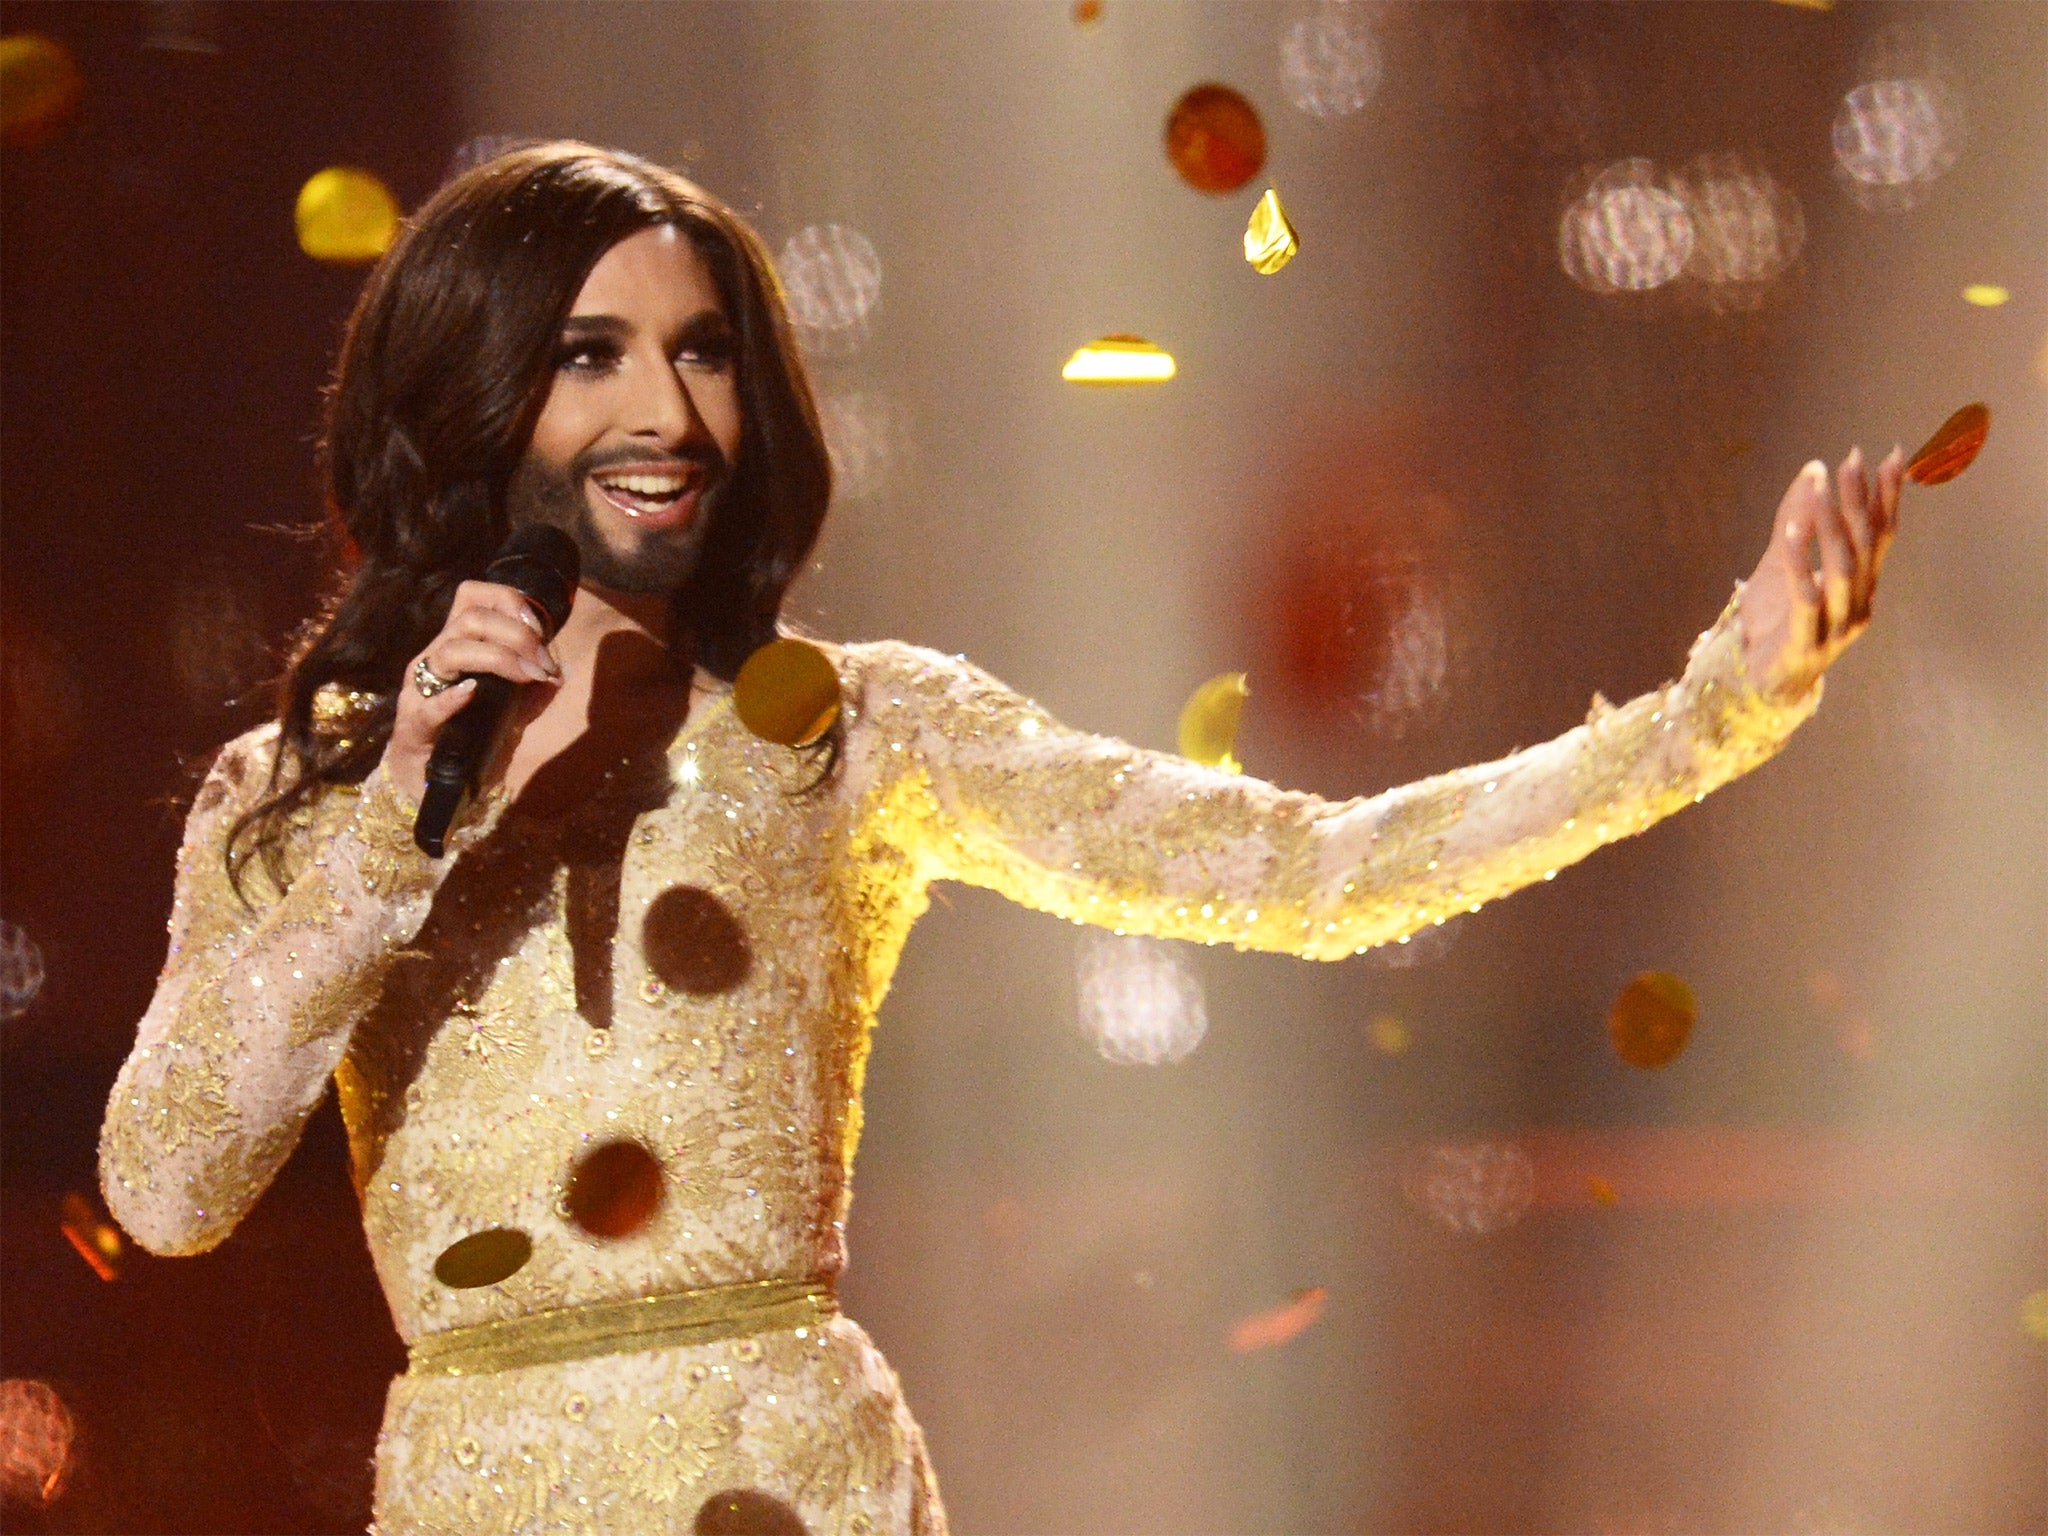 The event has also been a focus for international LGBT politics, amplified by Conchita Wurst winning Eurovision 2014